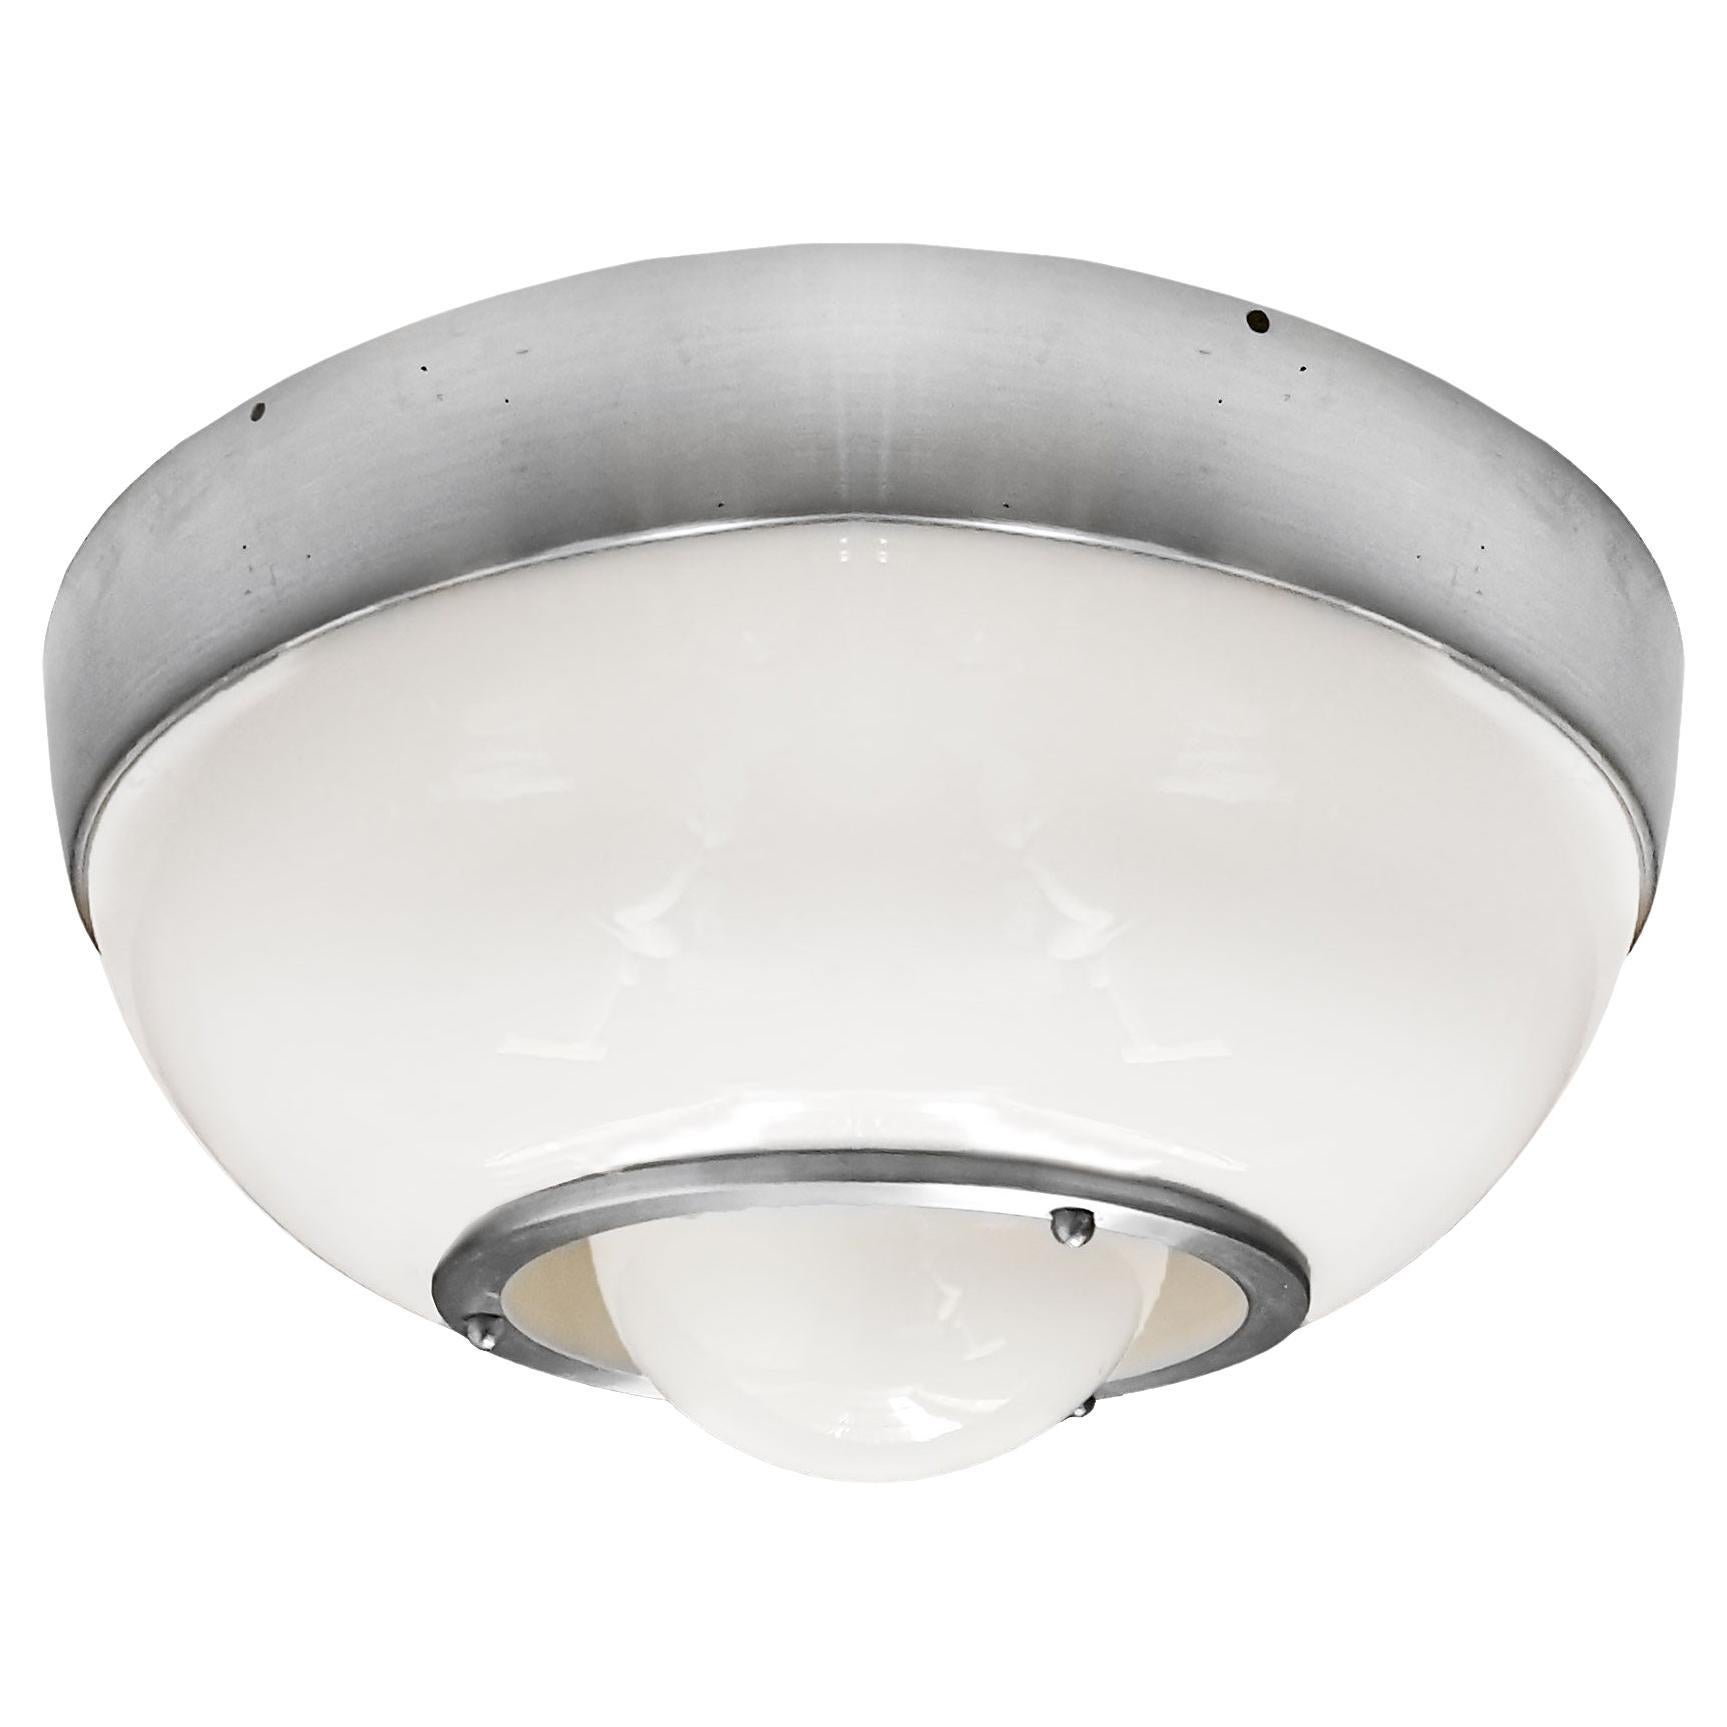 Mid-Century Modern Ceiling Light by Pia Guidetti Grippa for Lumi - Italy